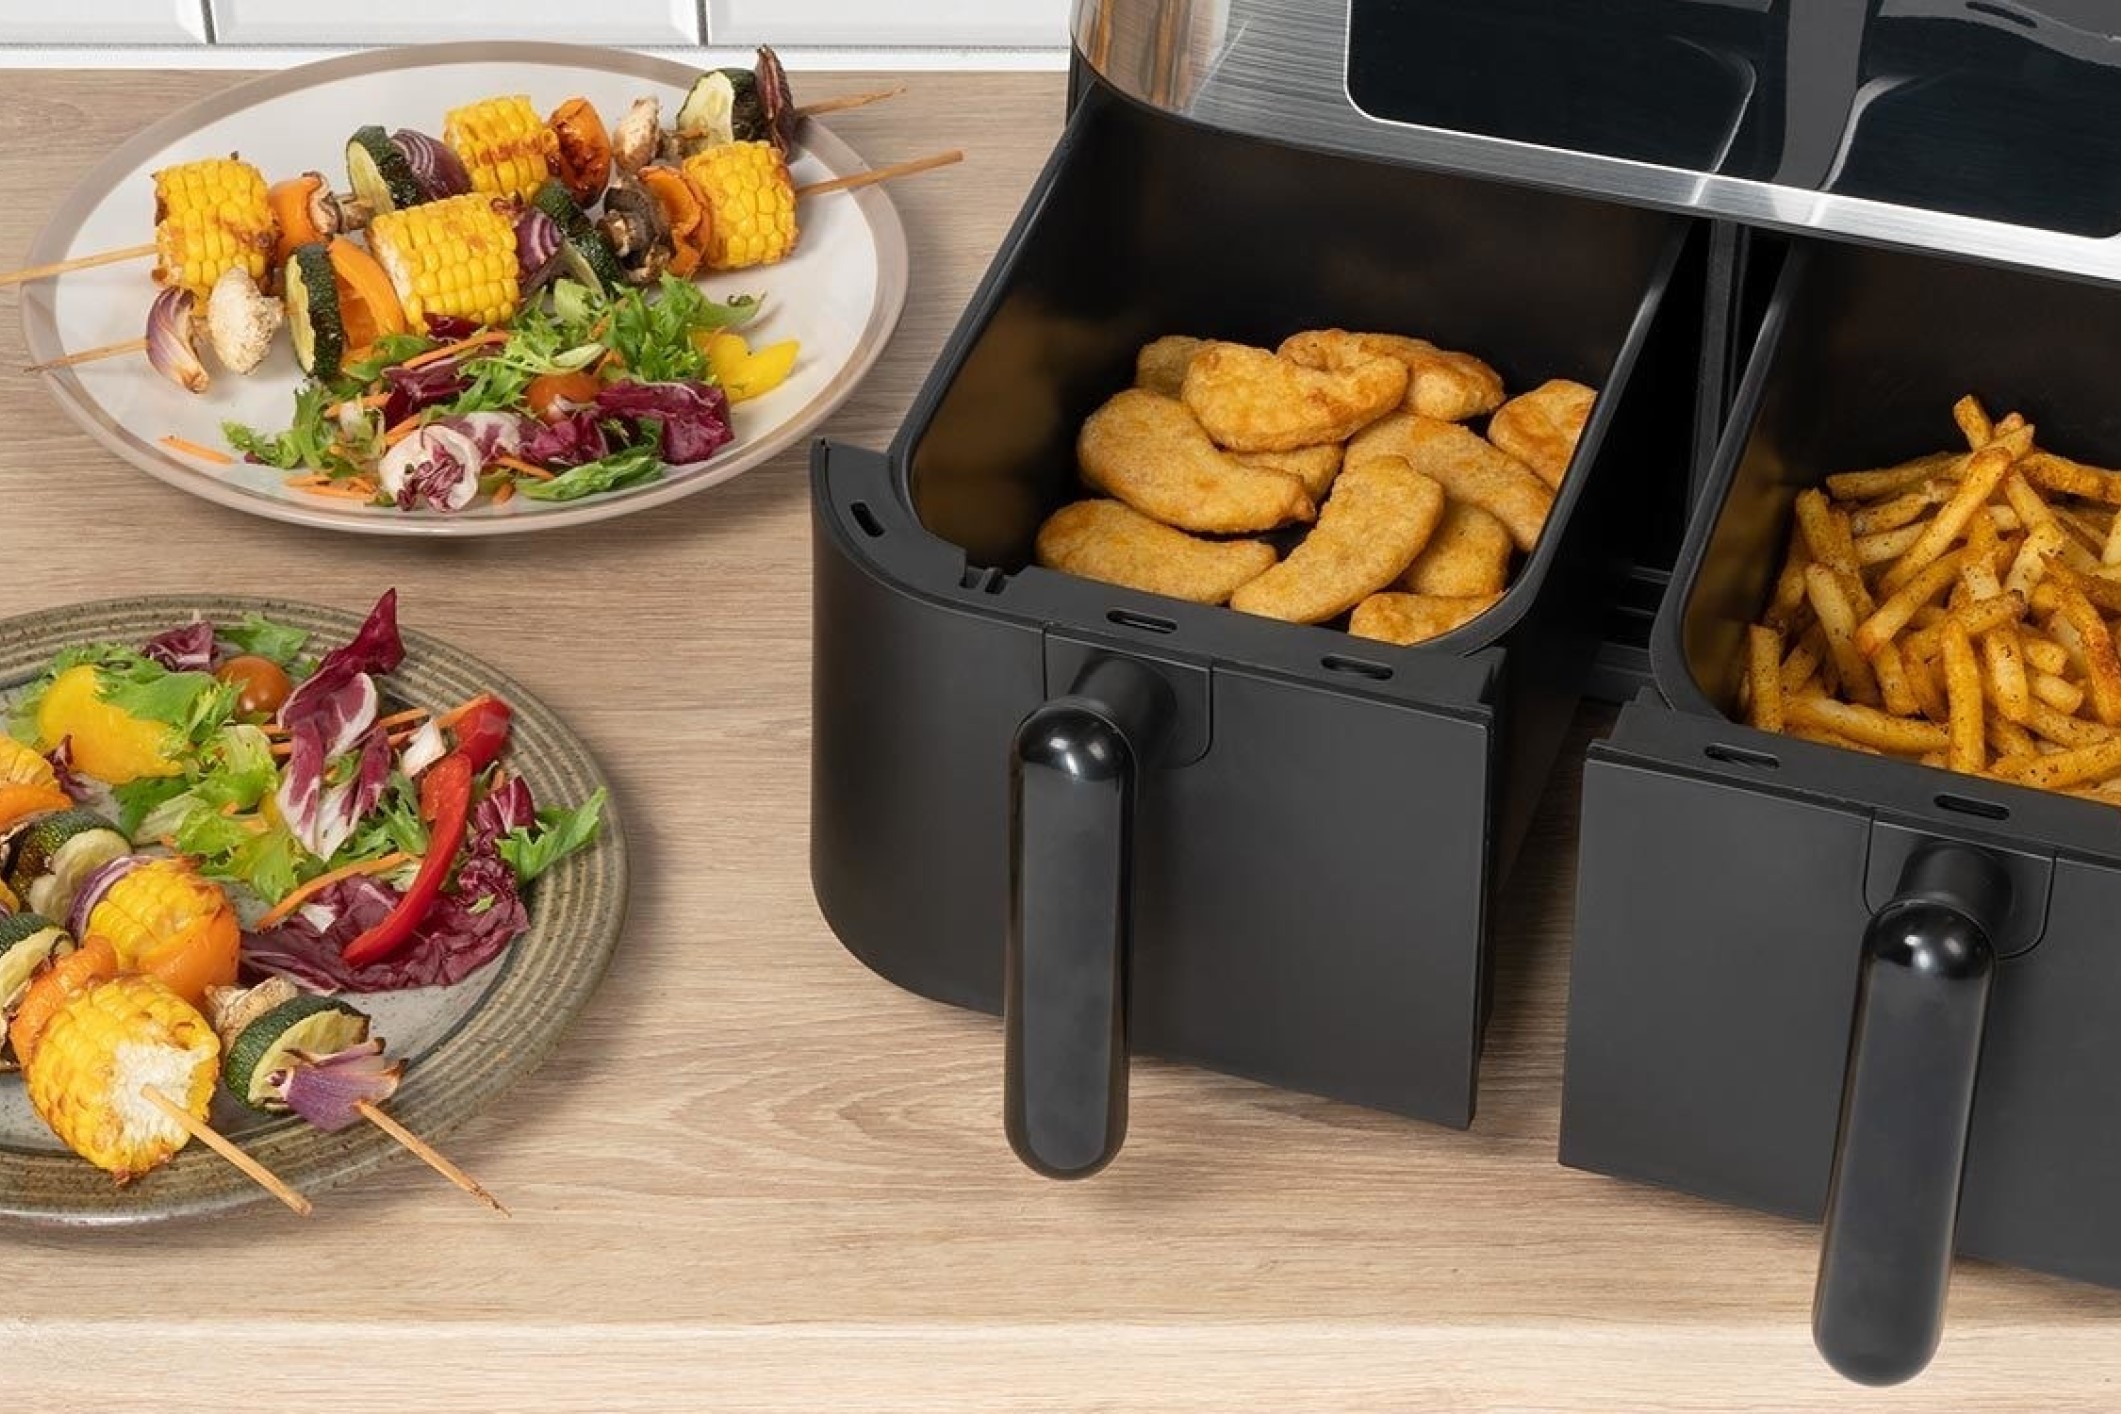 Two tray air fryer cooking chickena and chips